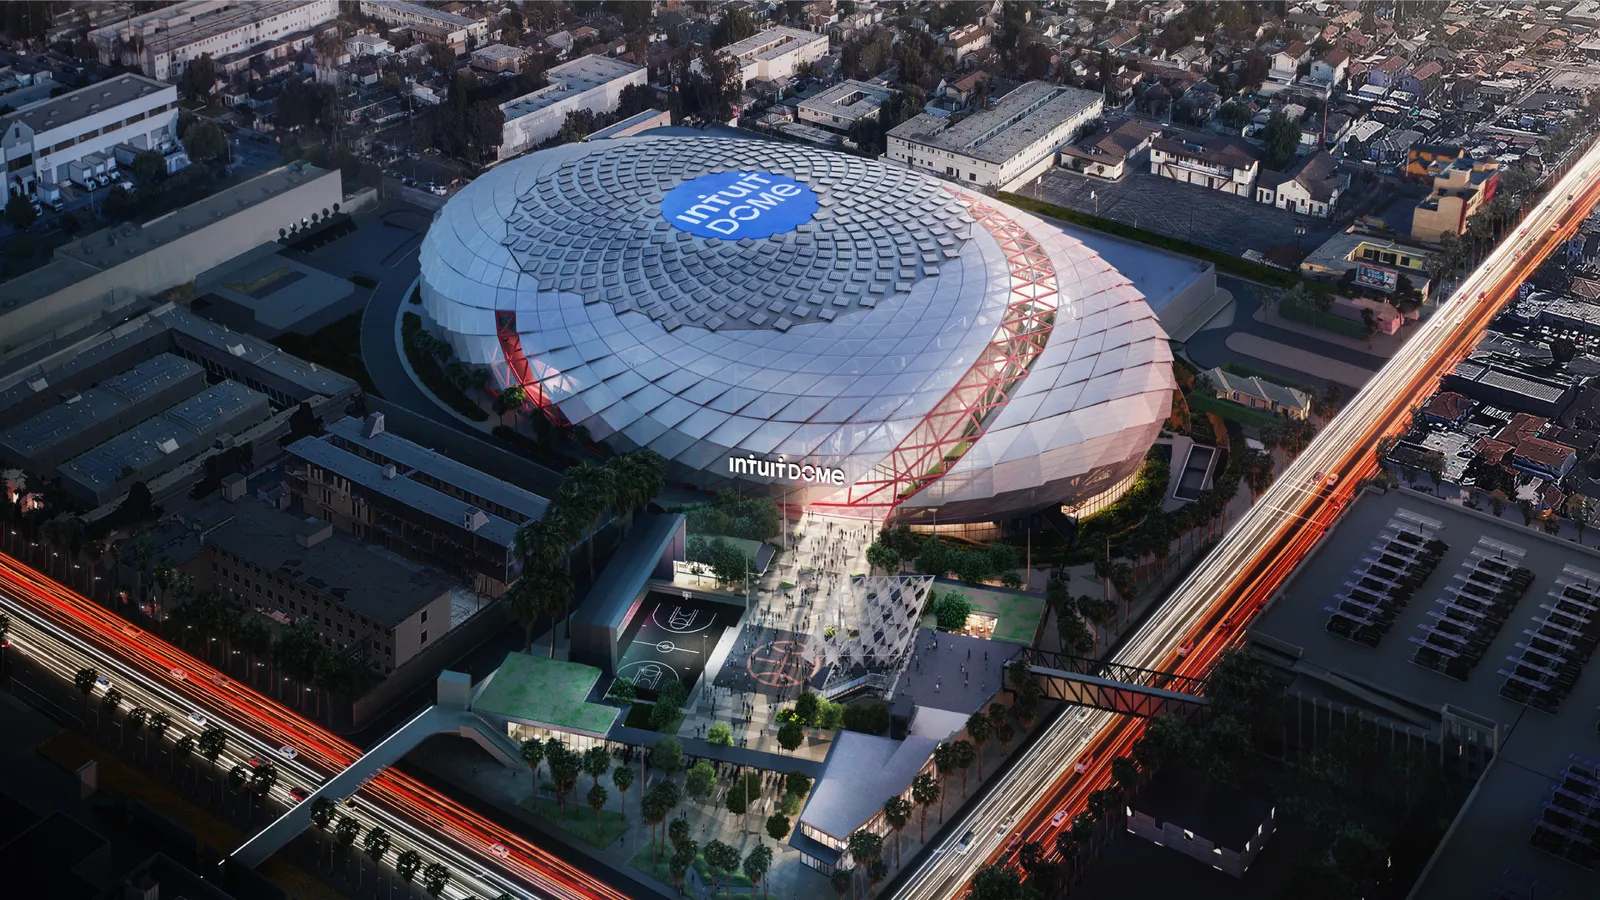 A rendering of the Intuit Dome basketball arena in Los Angeles.